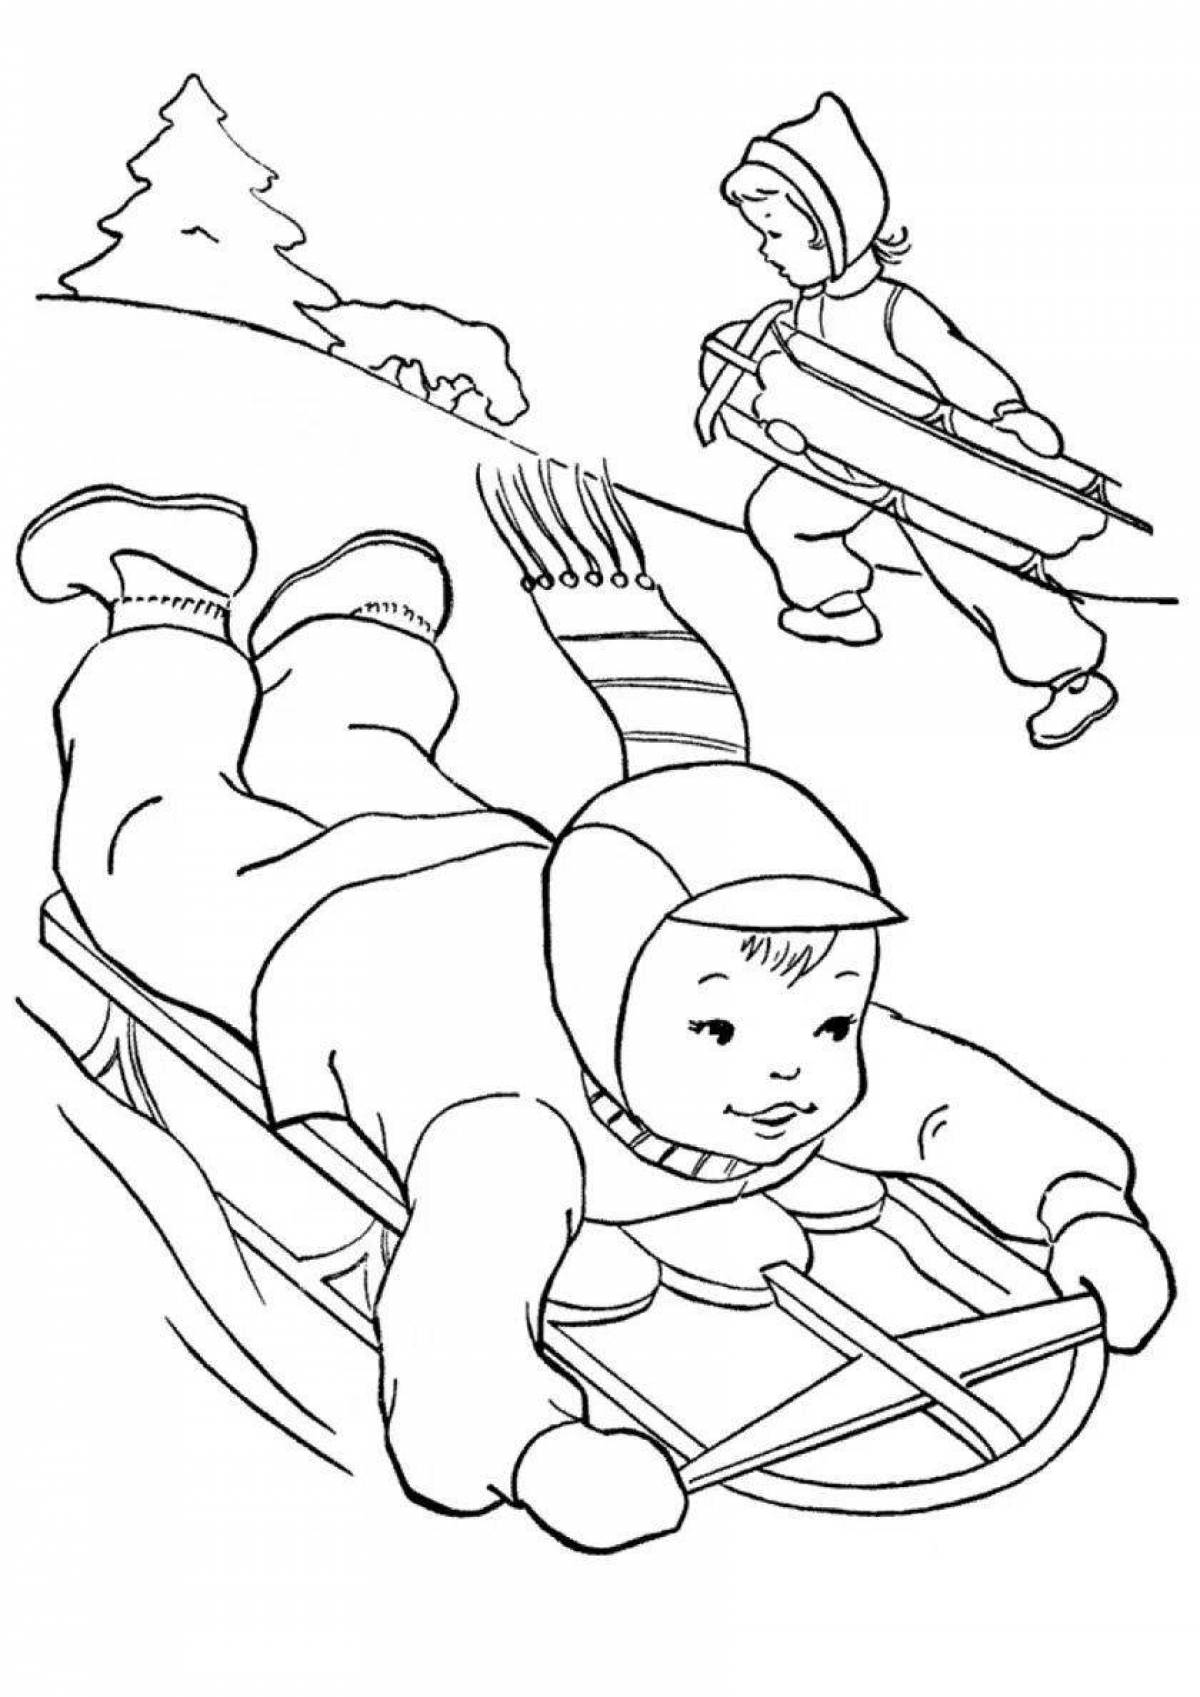 Cute kyzygy suretter coloring book